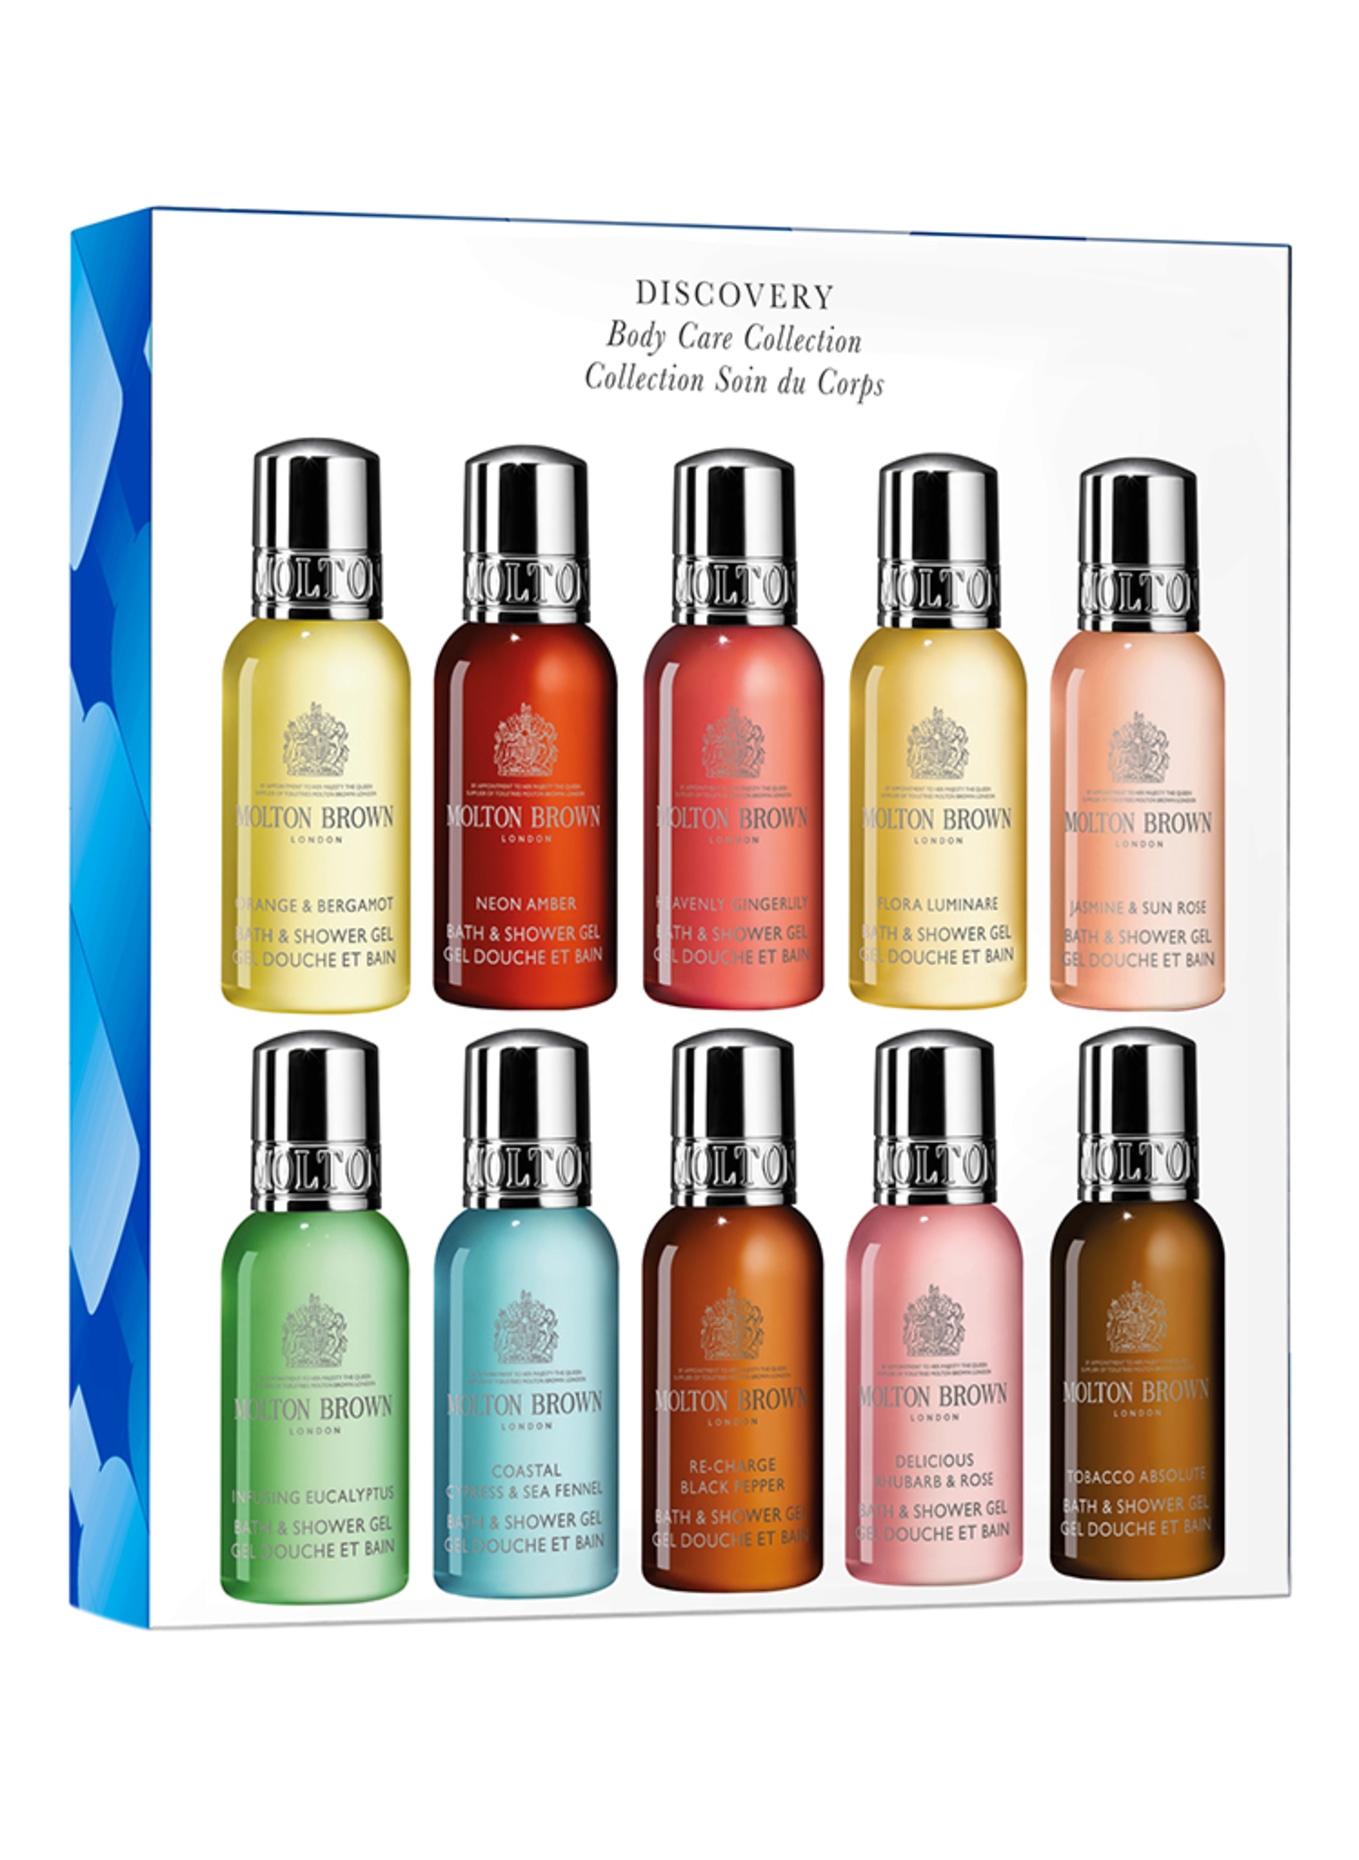 MOLTON BROWN DISCOVERY BODY CARE COLLECTION (Obrázek 1)